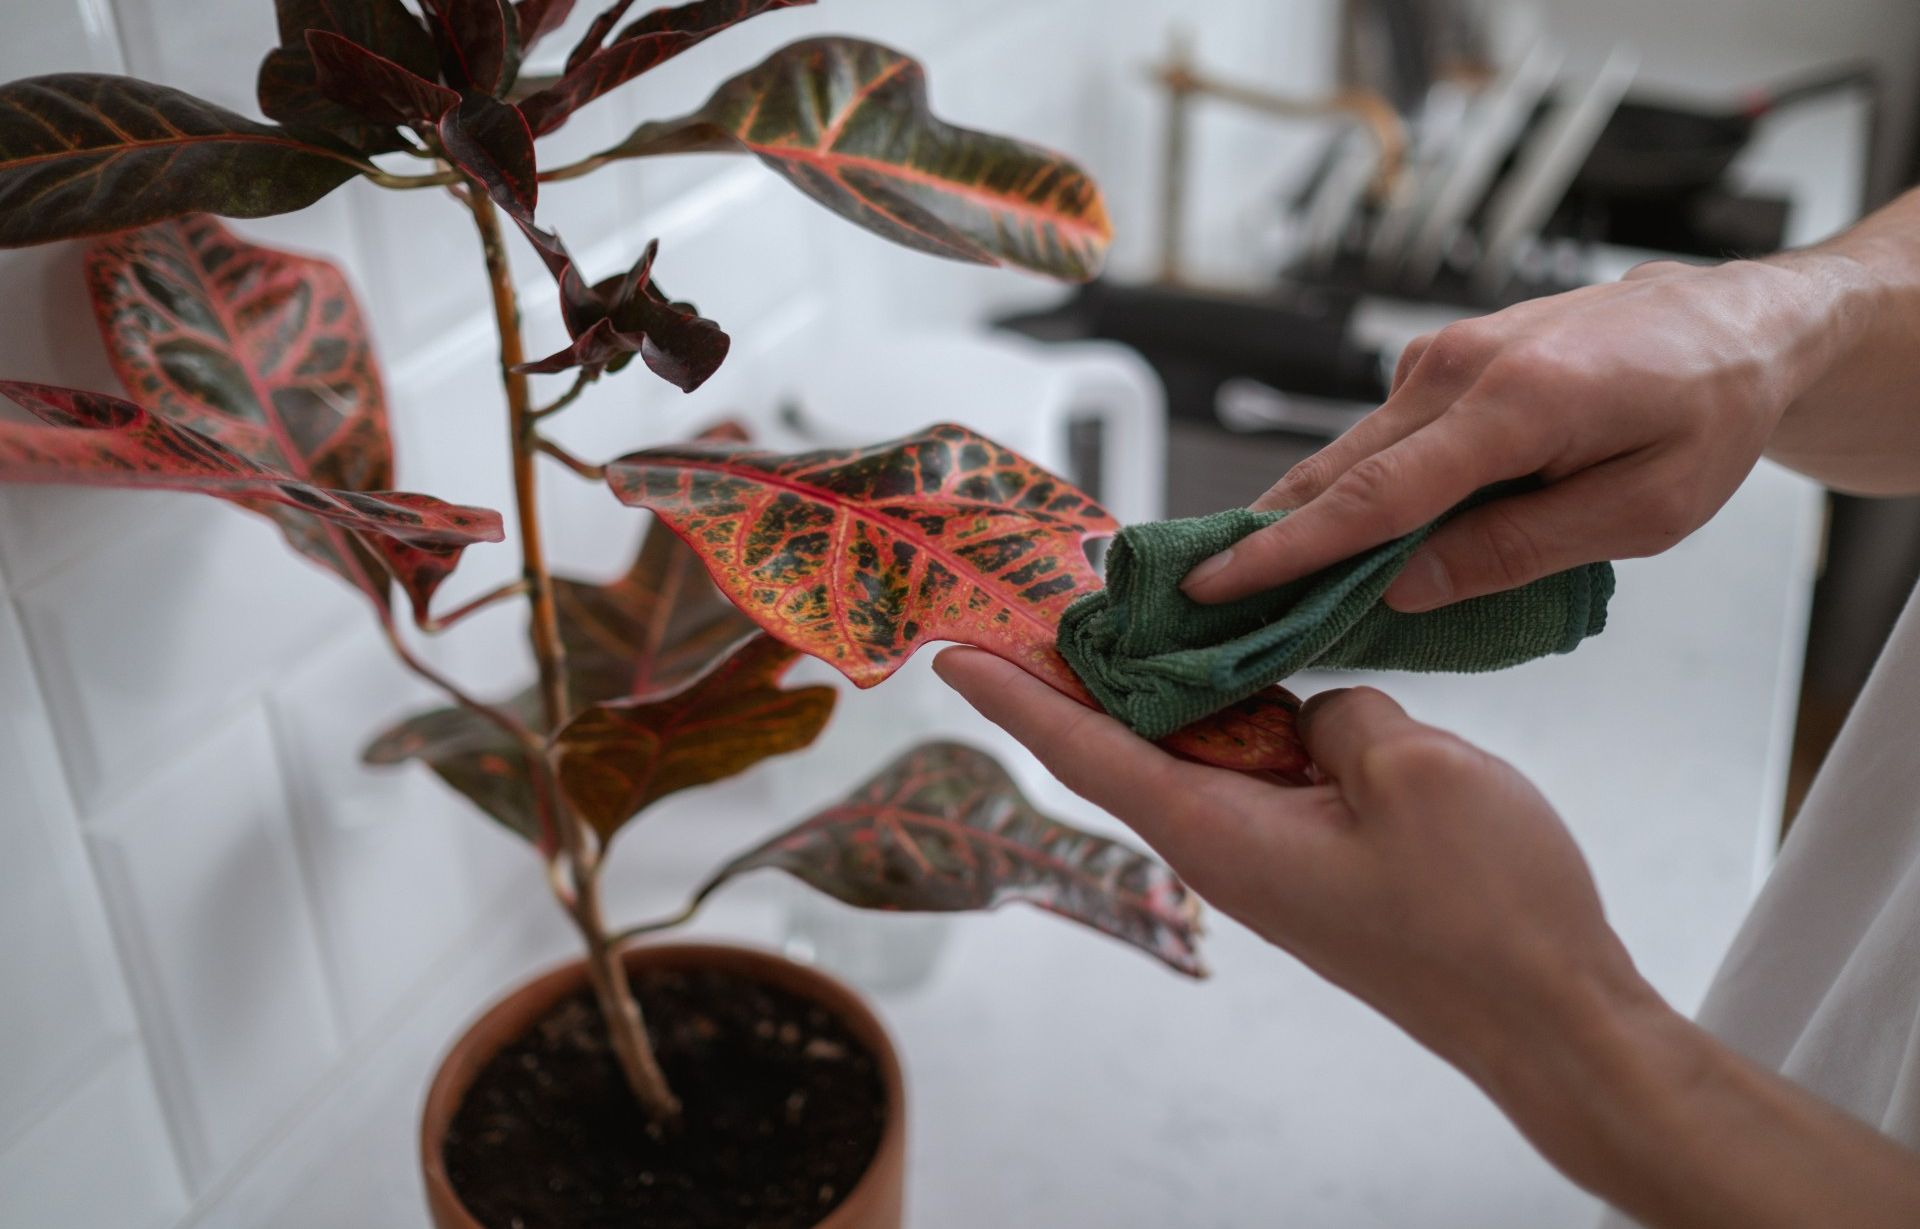 Wiping down a plant with a cloth